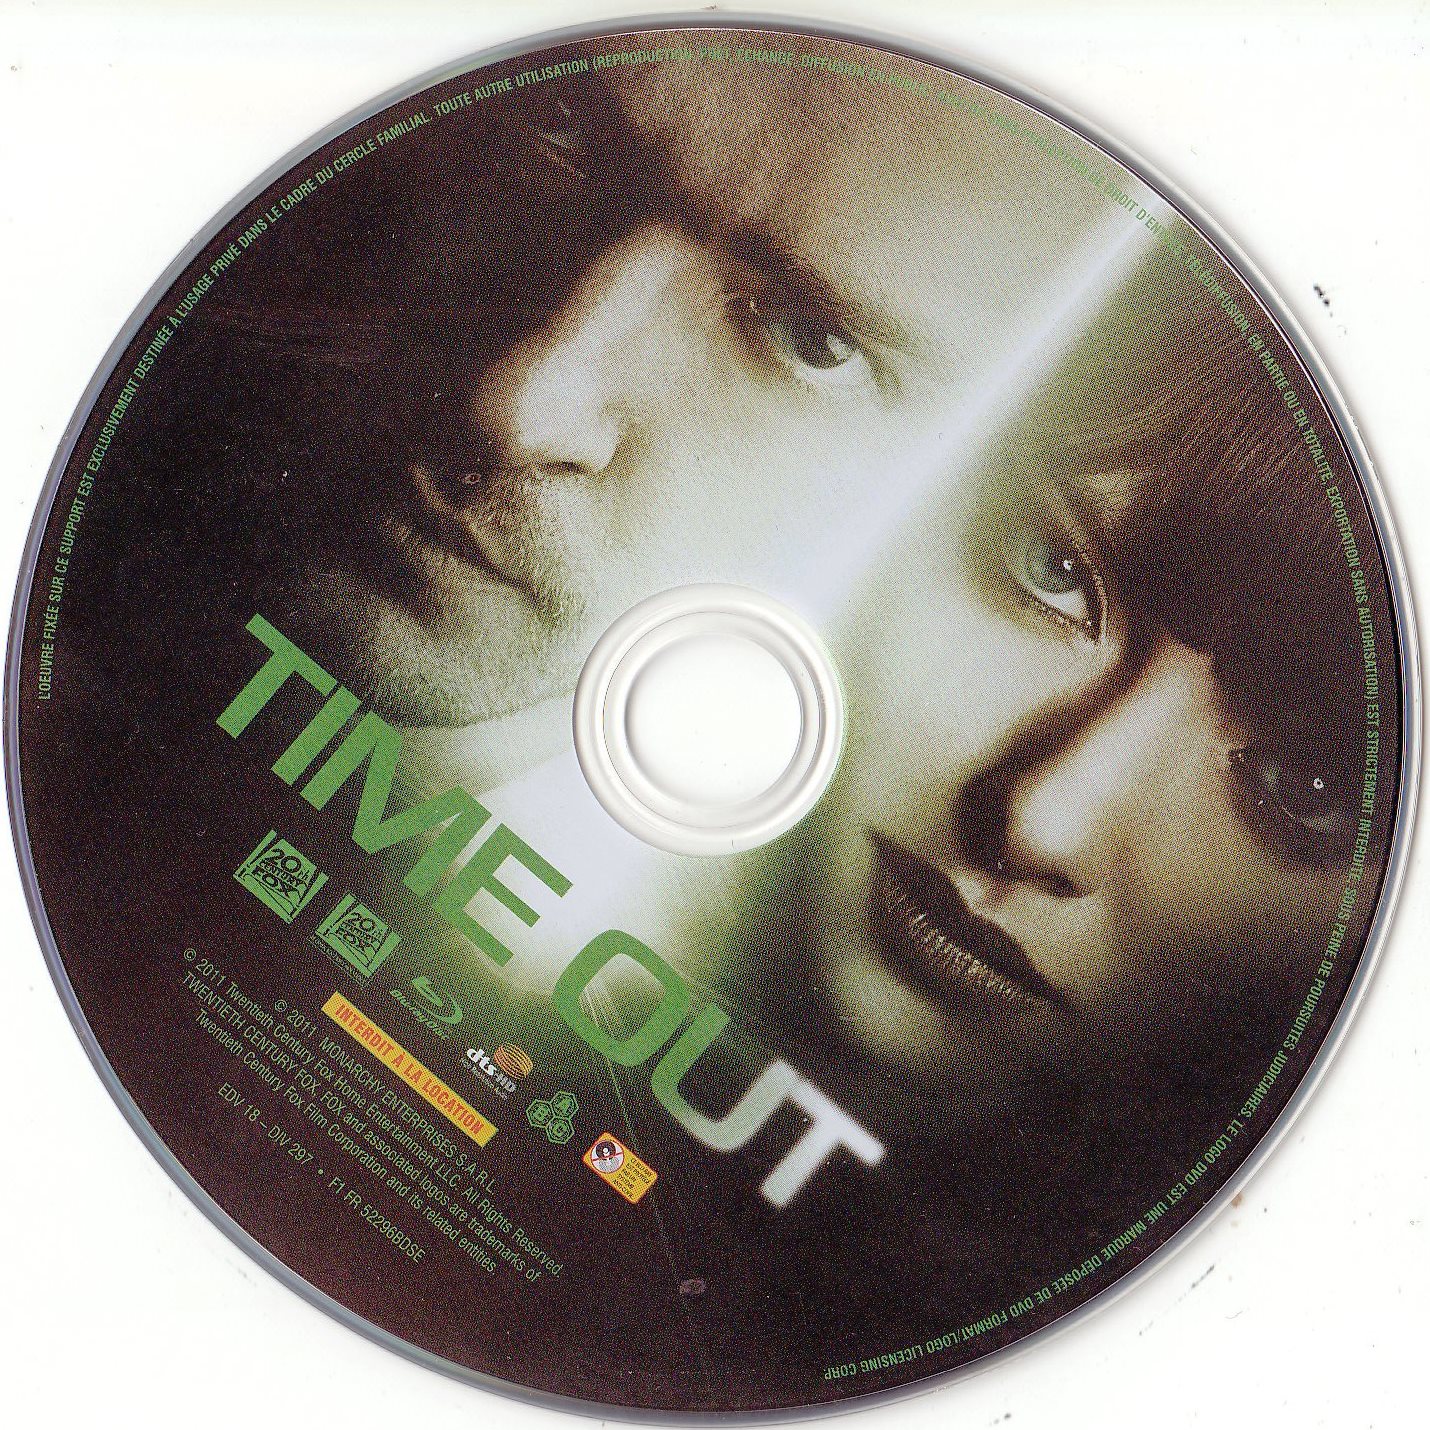 Time out (BLU-RAY)